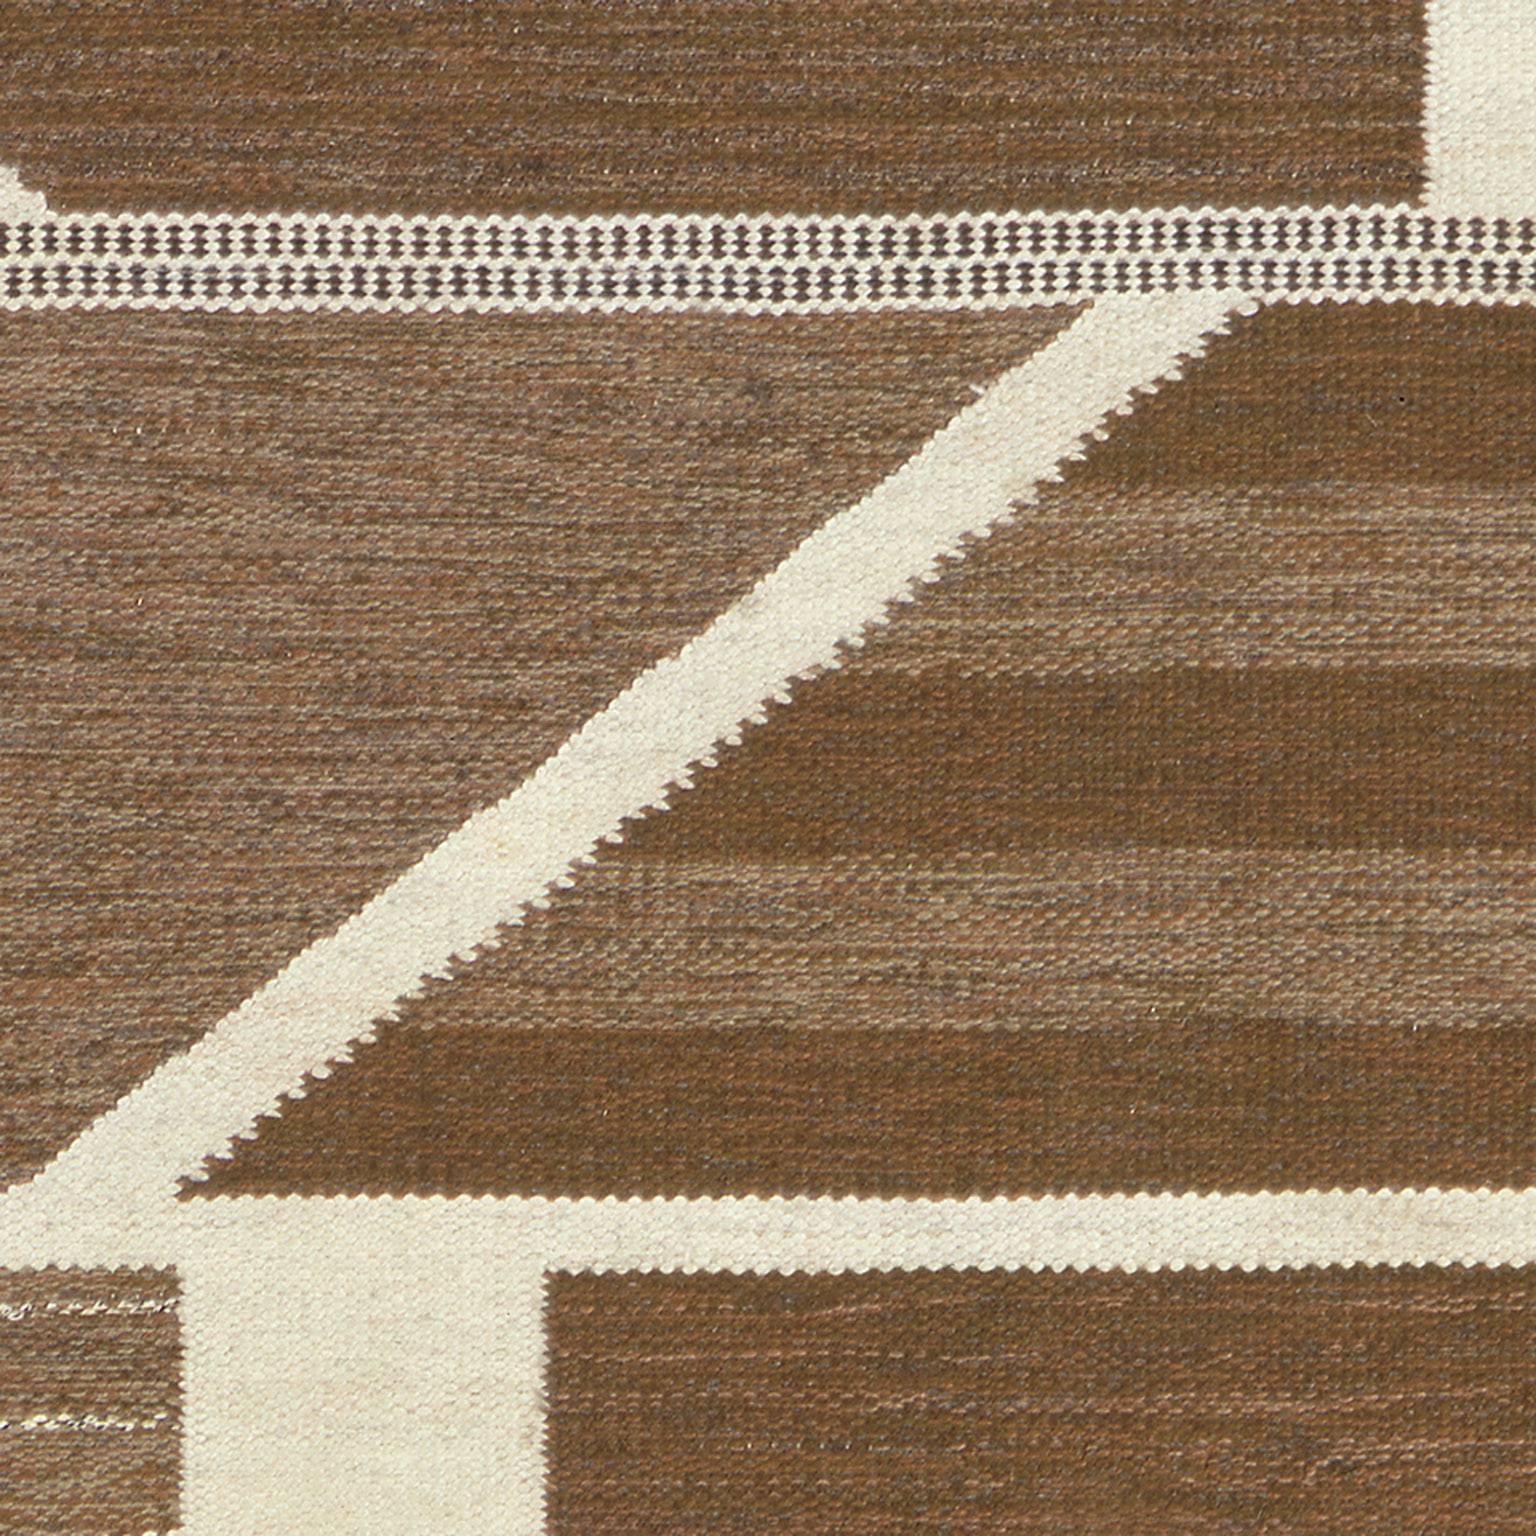 Late 20th Century Swedish Flat-Weave Carpet In Good Condition For Sale In New York, NY